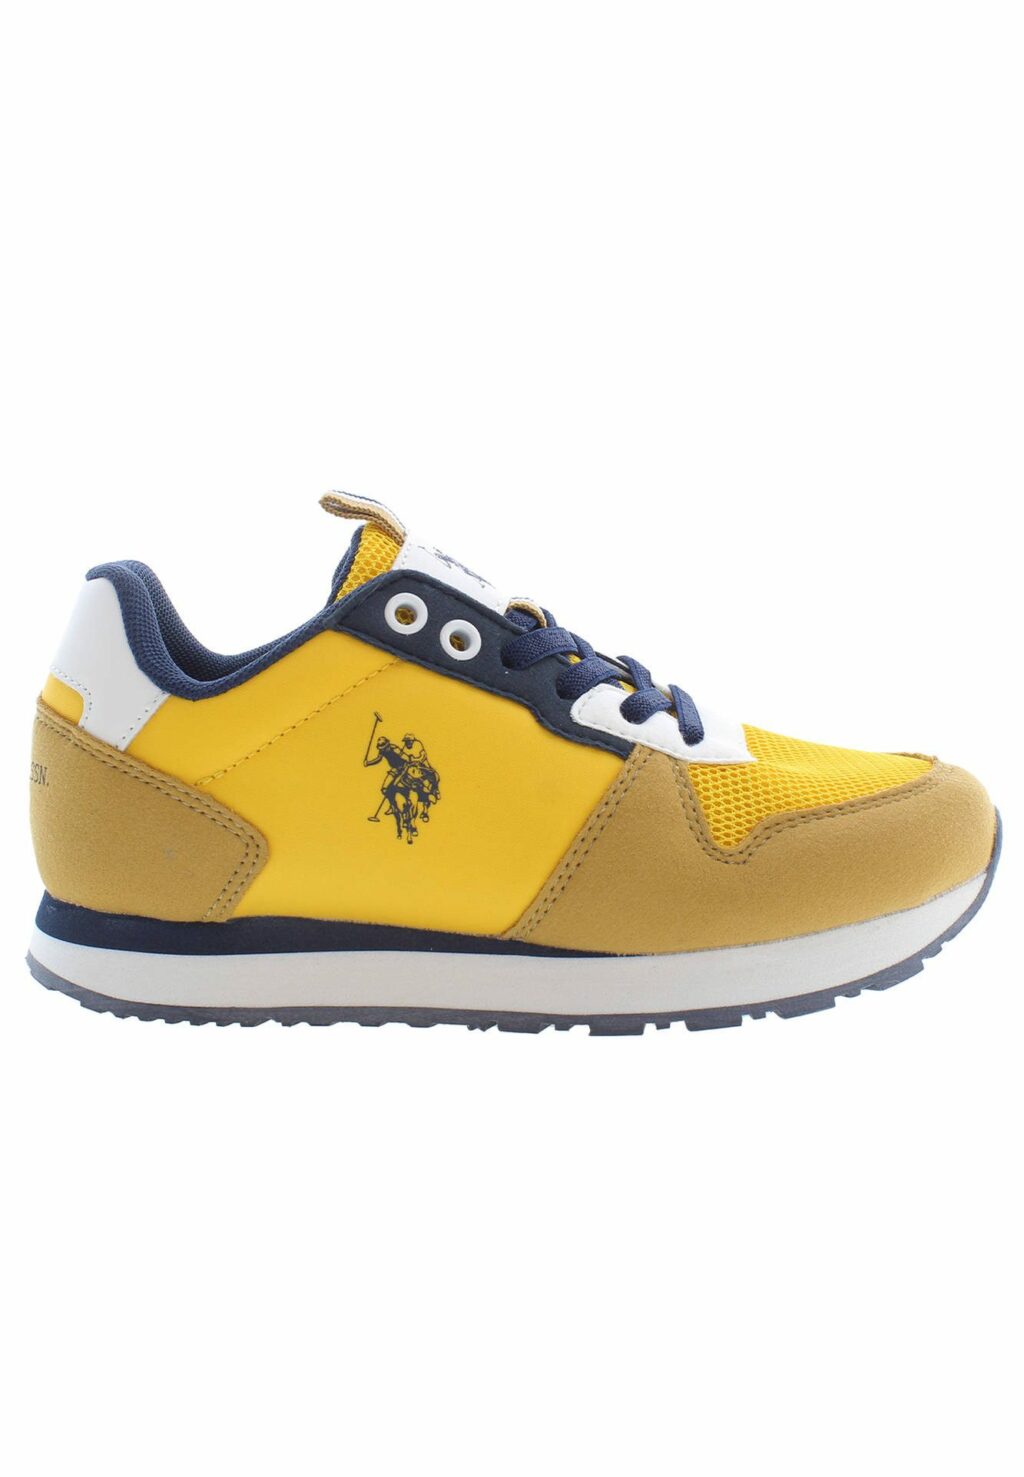 US POLO BEST PRICE YELLOW KIDS SPORT SHOES NOBIK008K3TH1_GIALLO_YEL